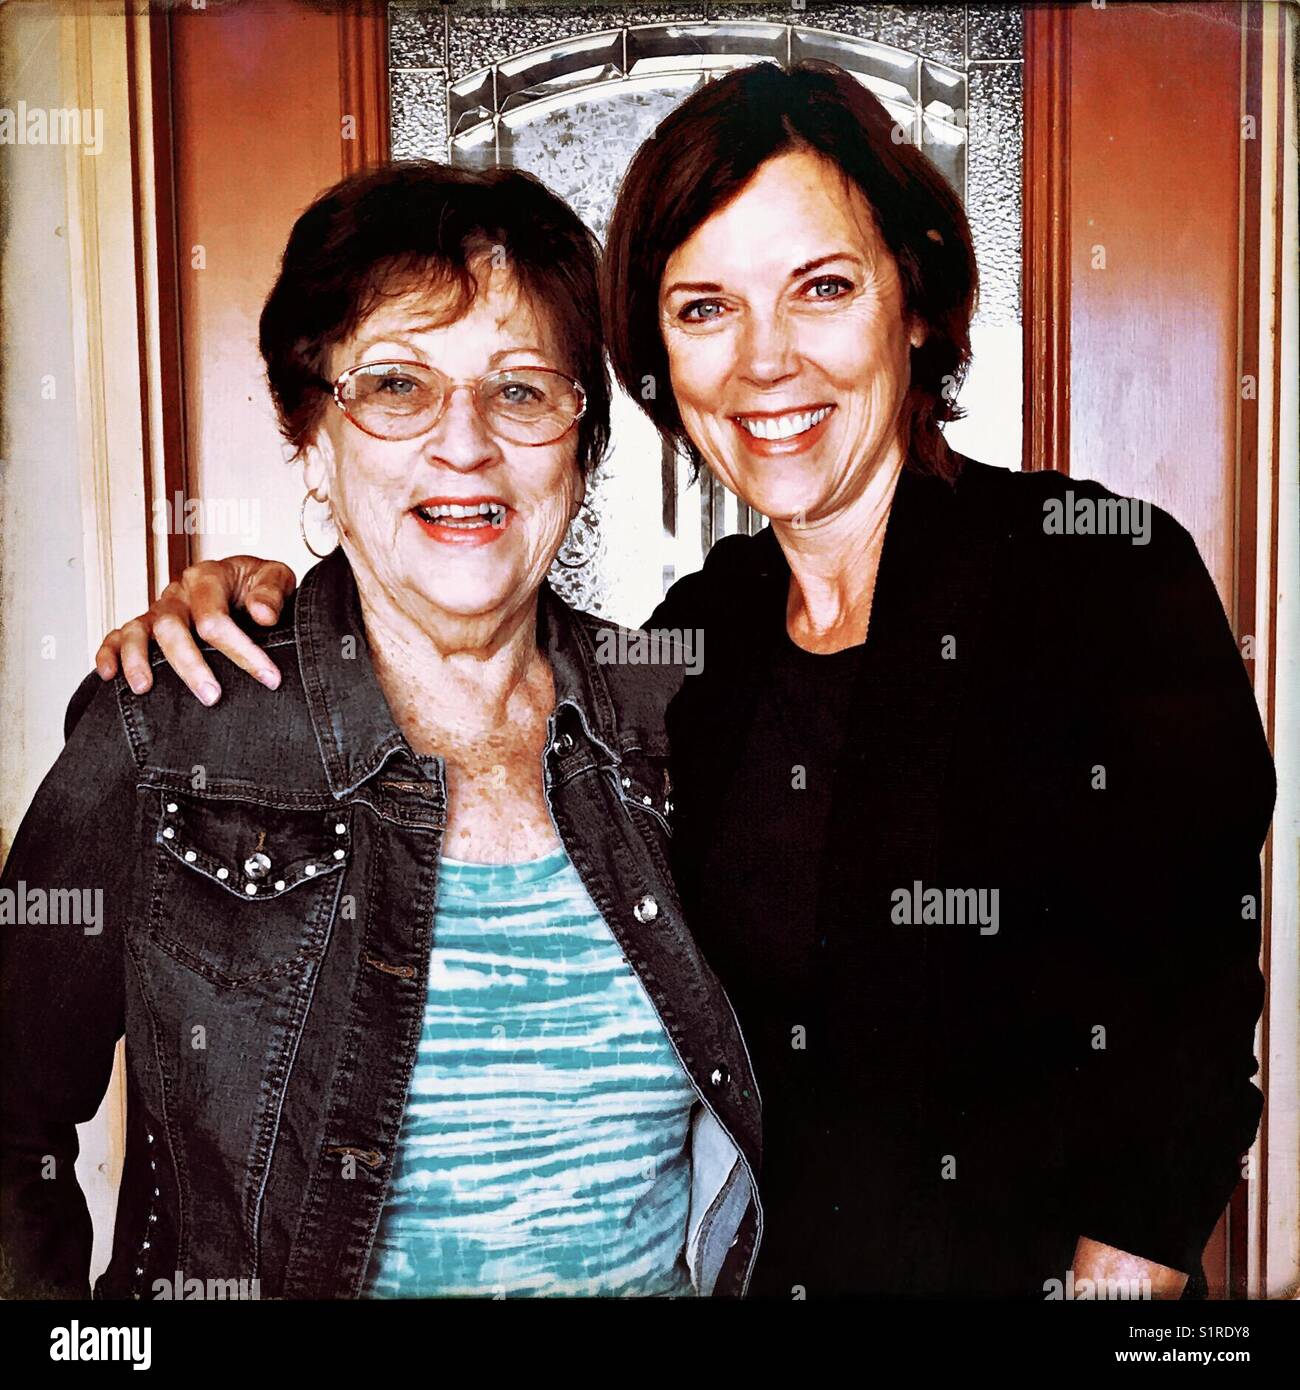 A smiling baby boomer daughter and her smiling mother face the camera in front of the exterior door. Stock Photo